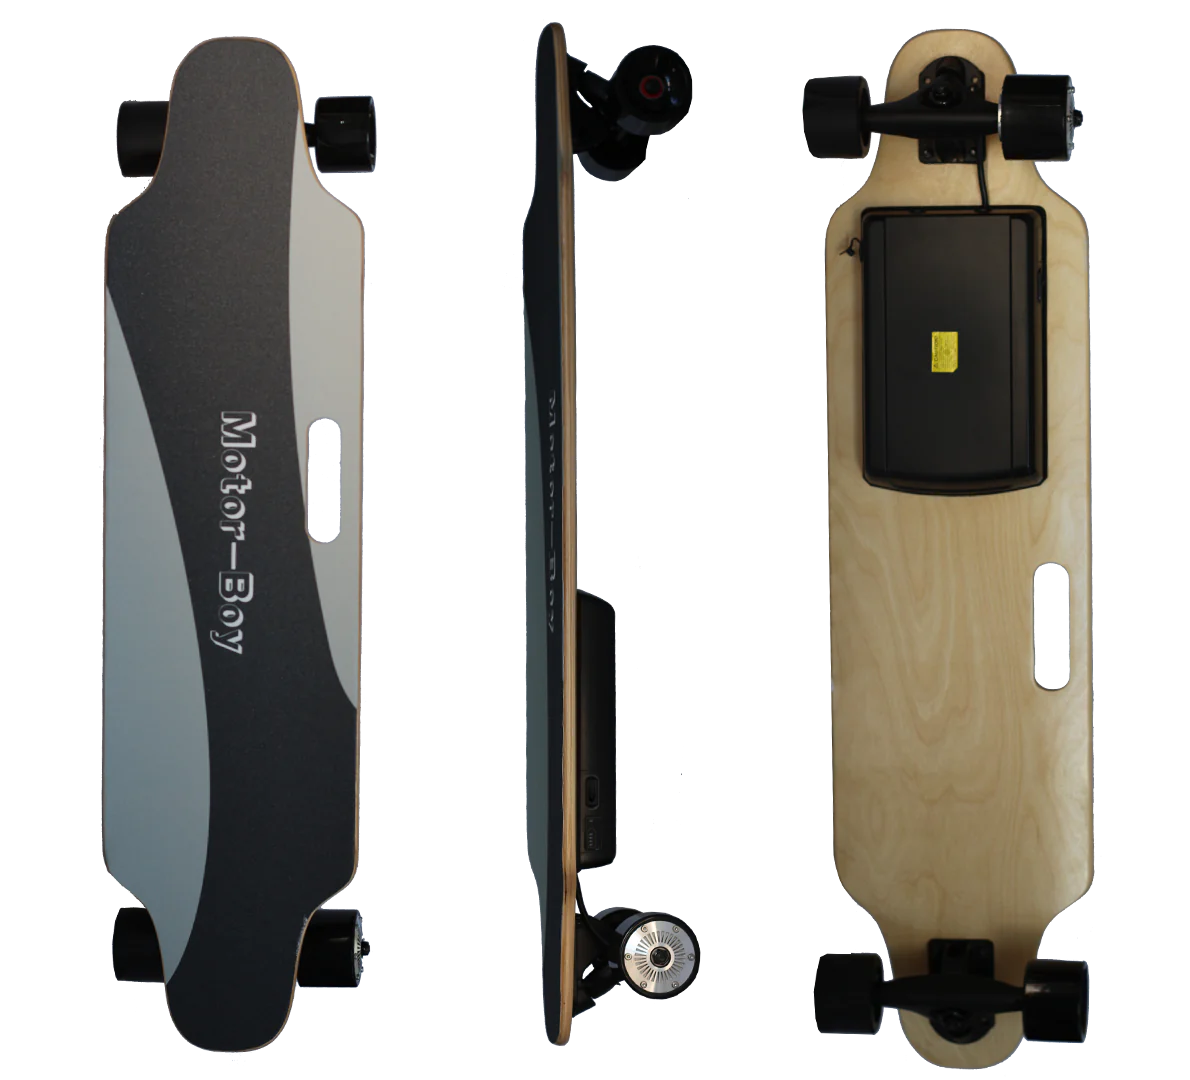 Thryve City Walker Electric Skateboard (Up to 13 MPH)